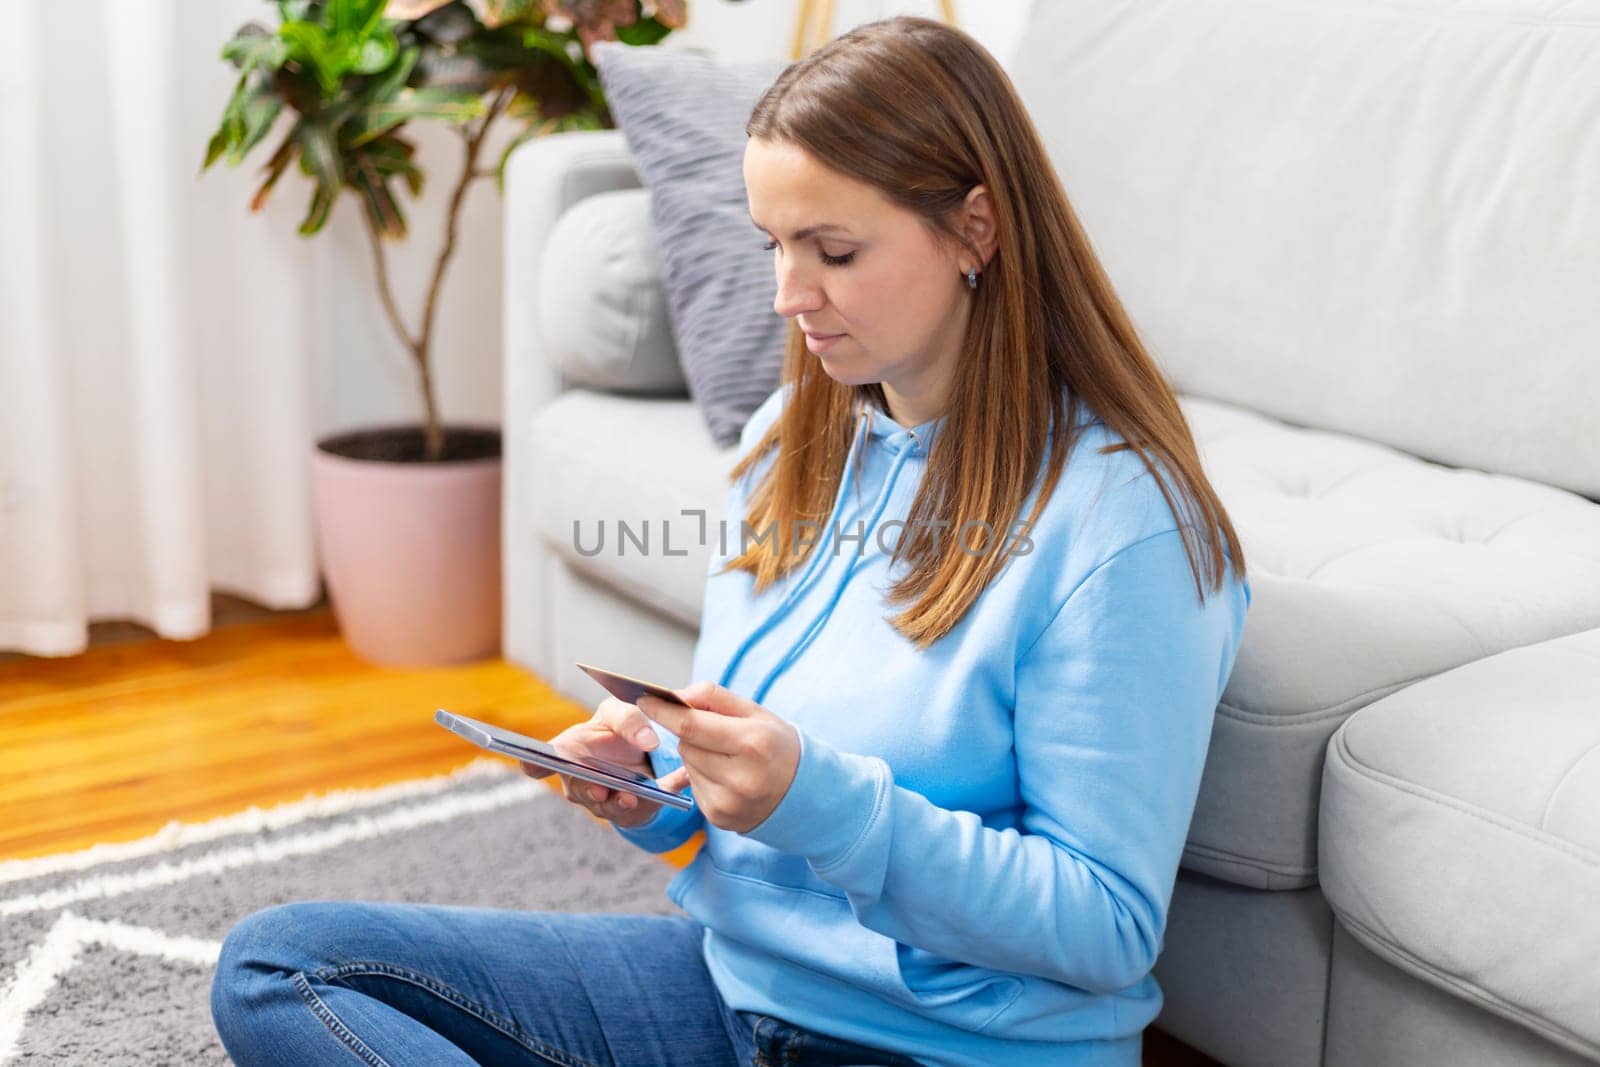 Young woman in a blue hoodie focused on browsing her smartphone while seated on the floor at home